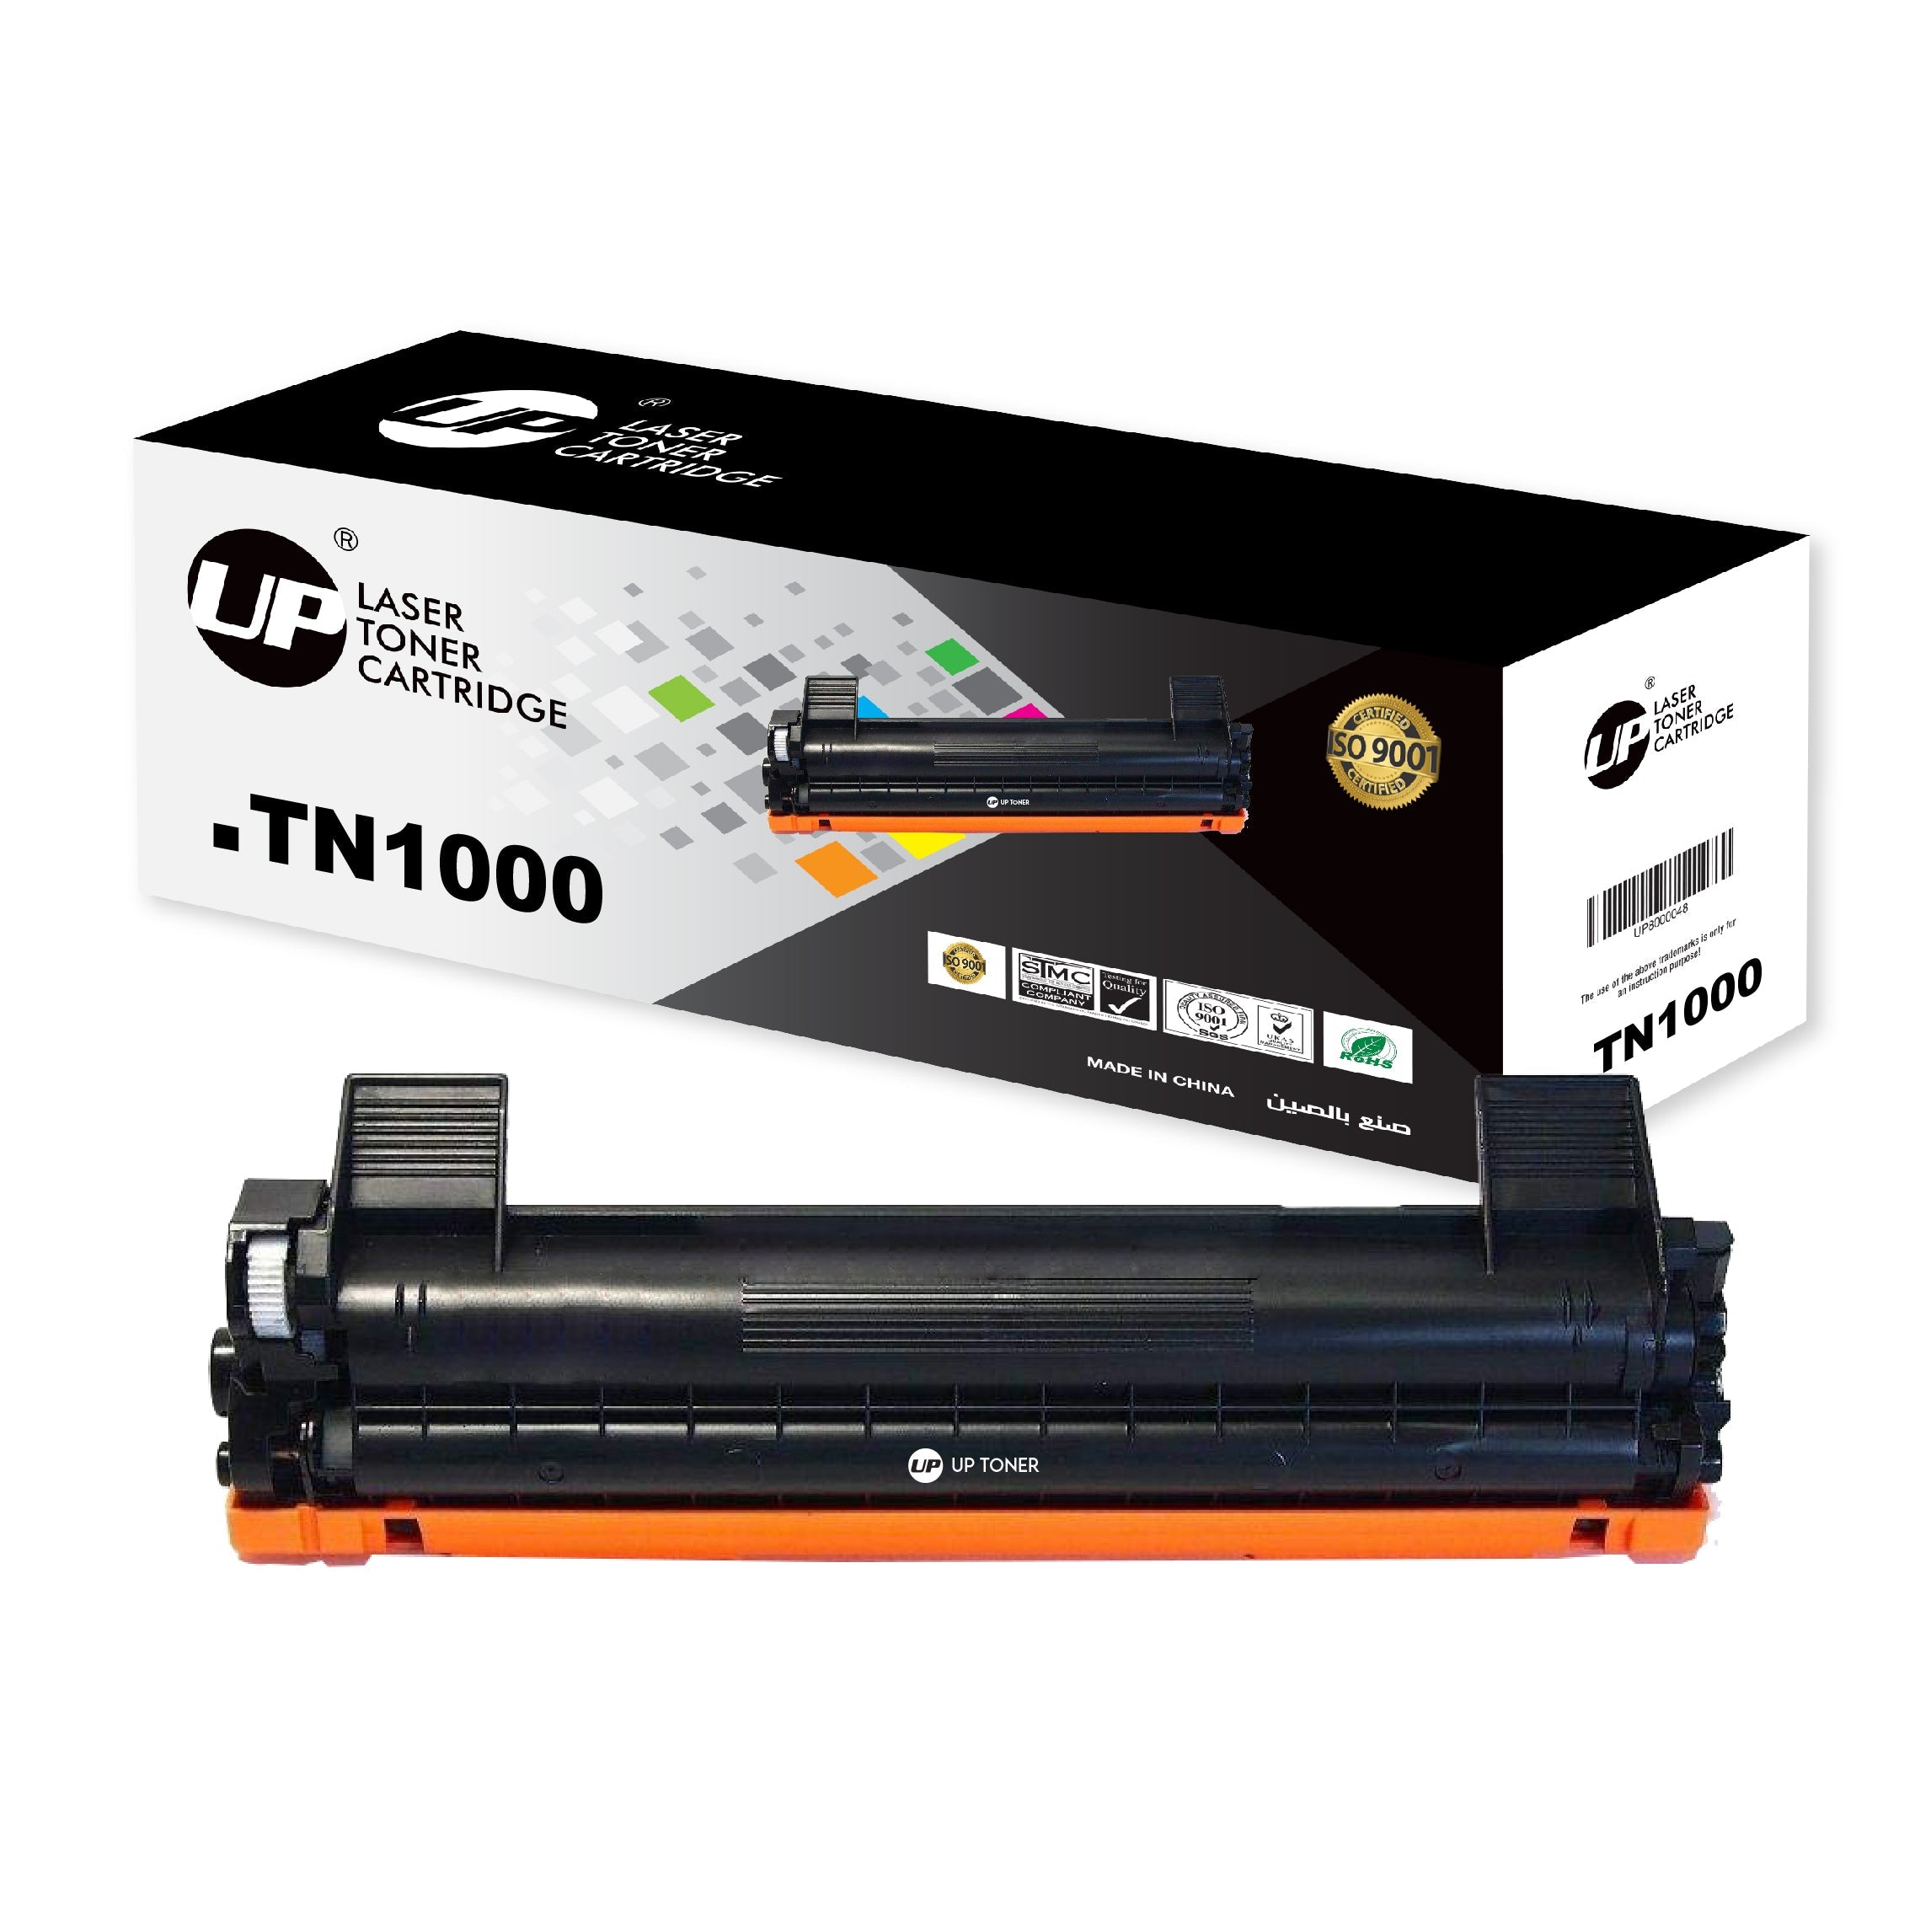 3 PK Toner Cartridge for Brother MFC-1810 MFC-1910W DCP-1510